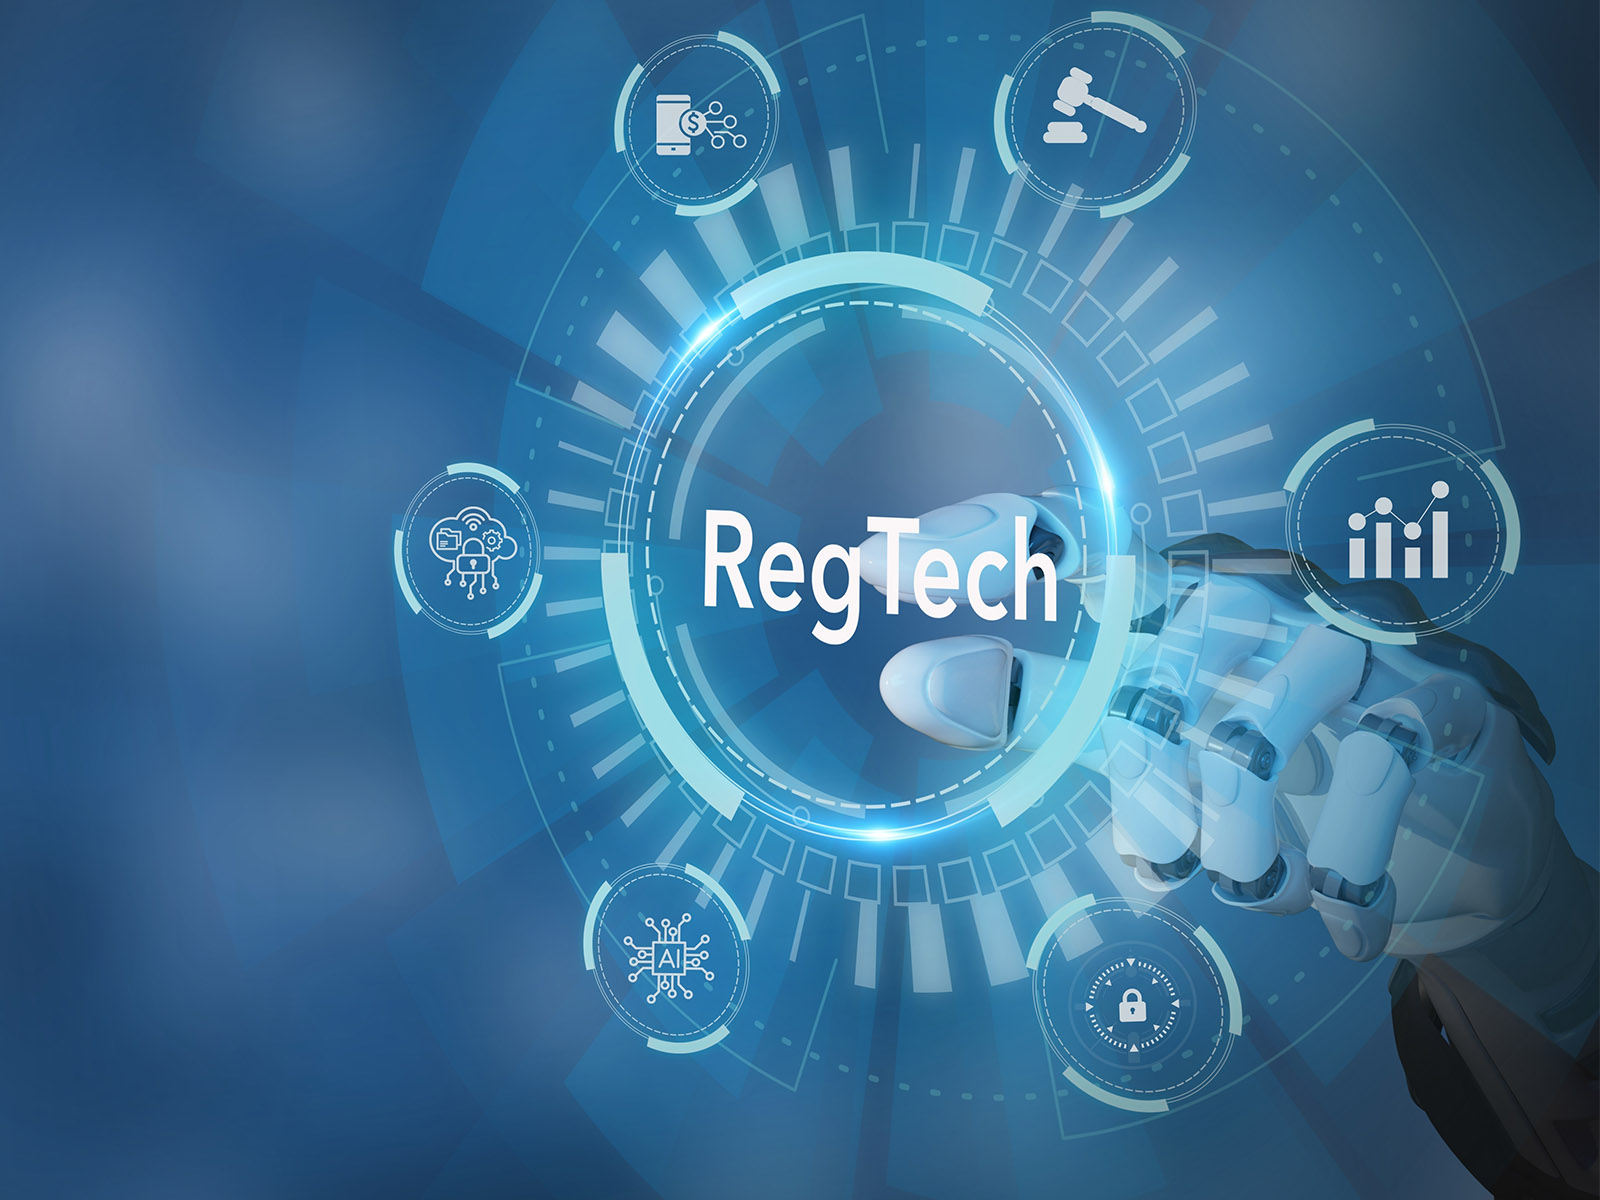 This illustration has the text "RegTech" at the center of a blue digital-concept circle that is surrounded by icons related to AML Compliance and GRC. AML Partners specializes in AML Compliance software, KYC software, Transaction Monitoring software, GRC software.